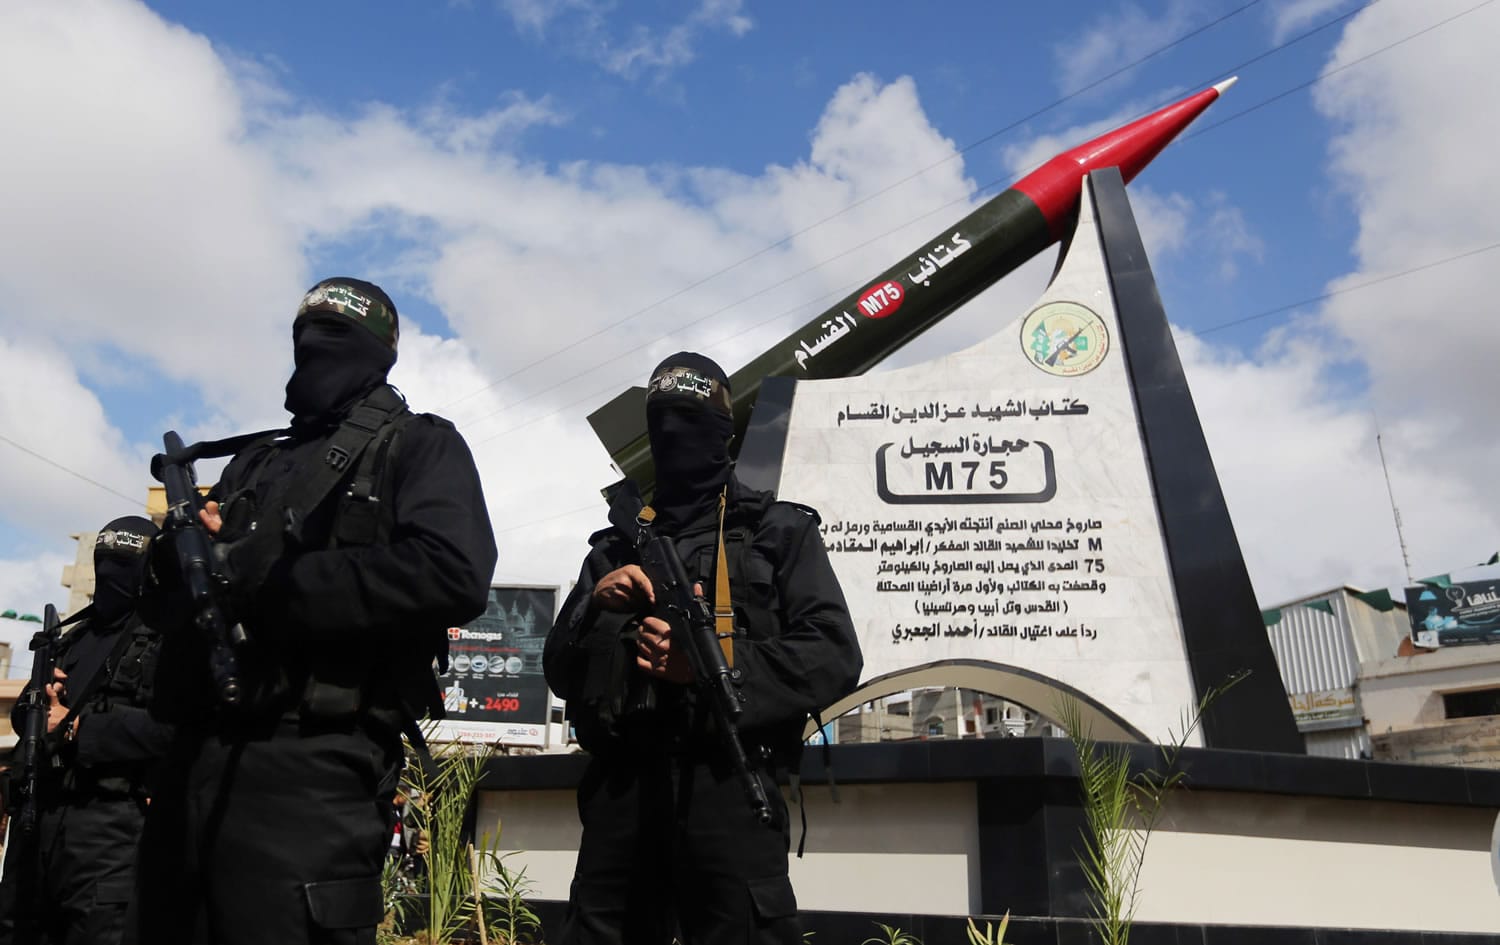 Hamas military wing members take part in a ceremony to inaugurate a monument marking the anniversary of the death of  a senior Hamas official Ibrahim Maqadama, killed in an Israeli air strike in 2003, in Gaza City on Monday.